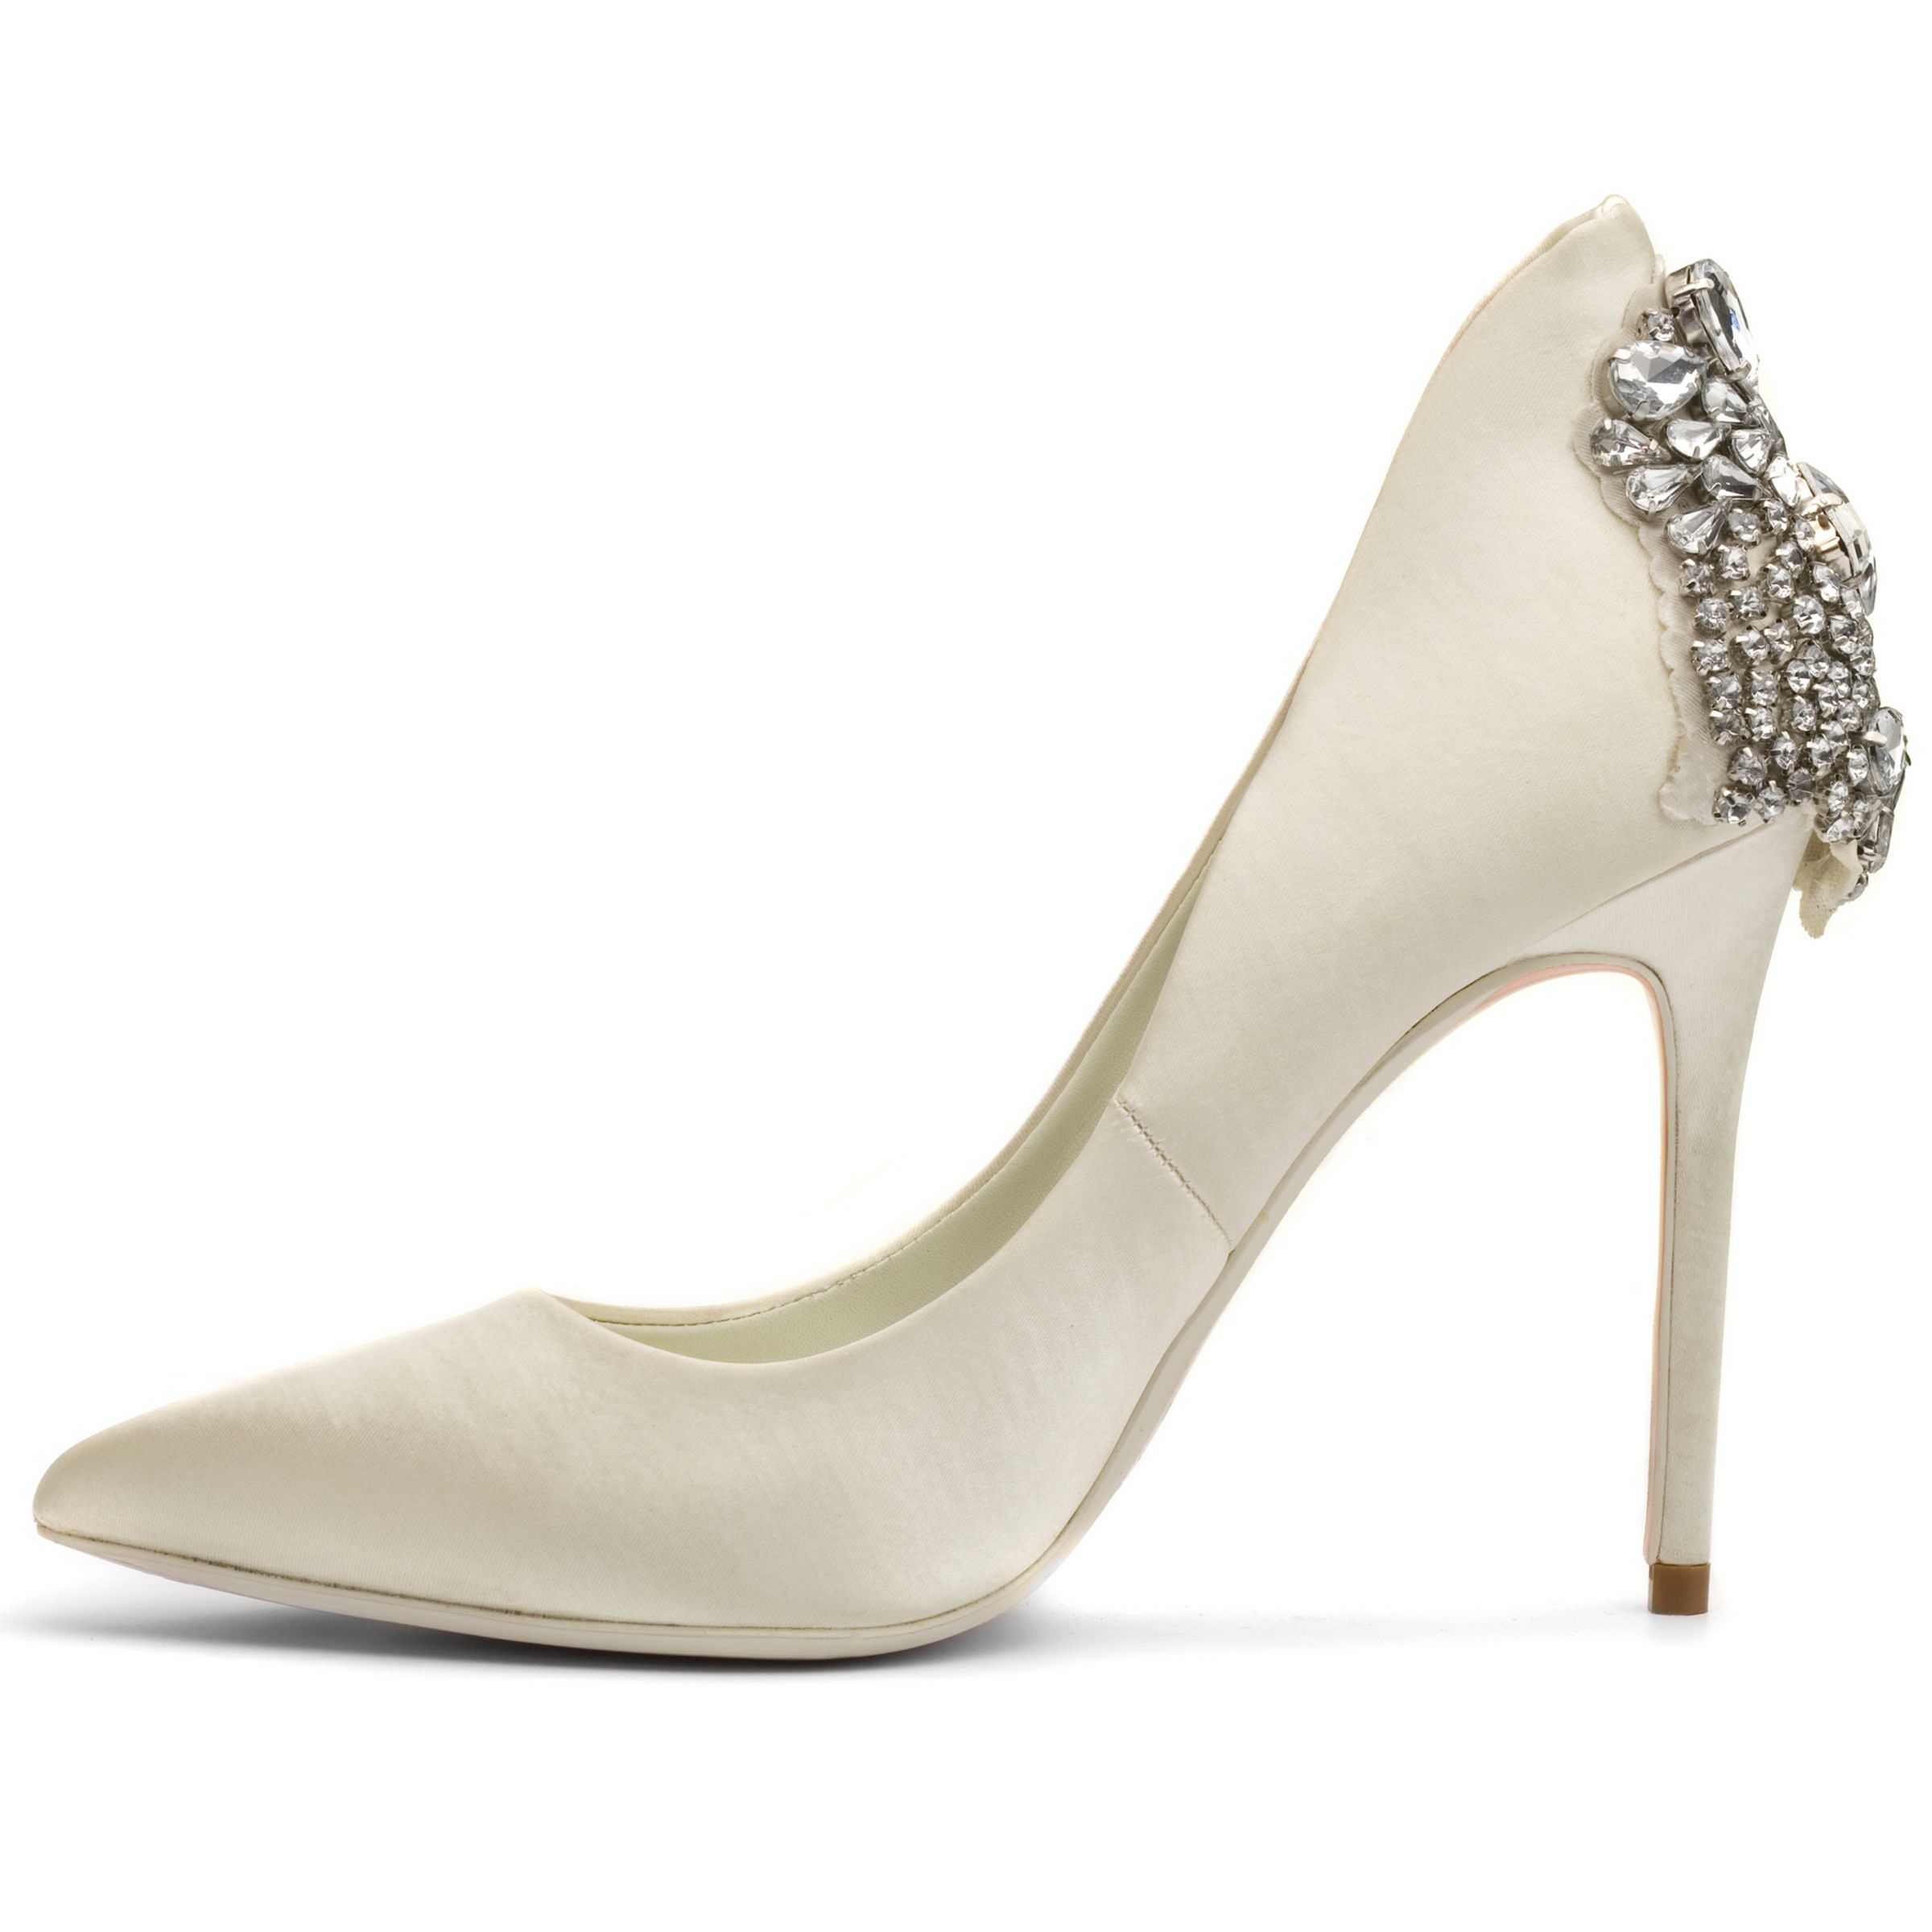 Ted Baker Mieon Embellished Court Shoes at John Lewis & Partners